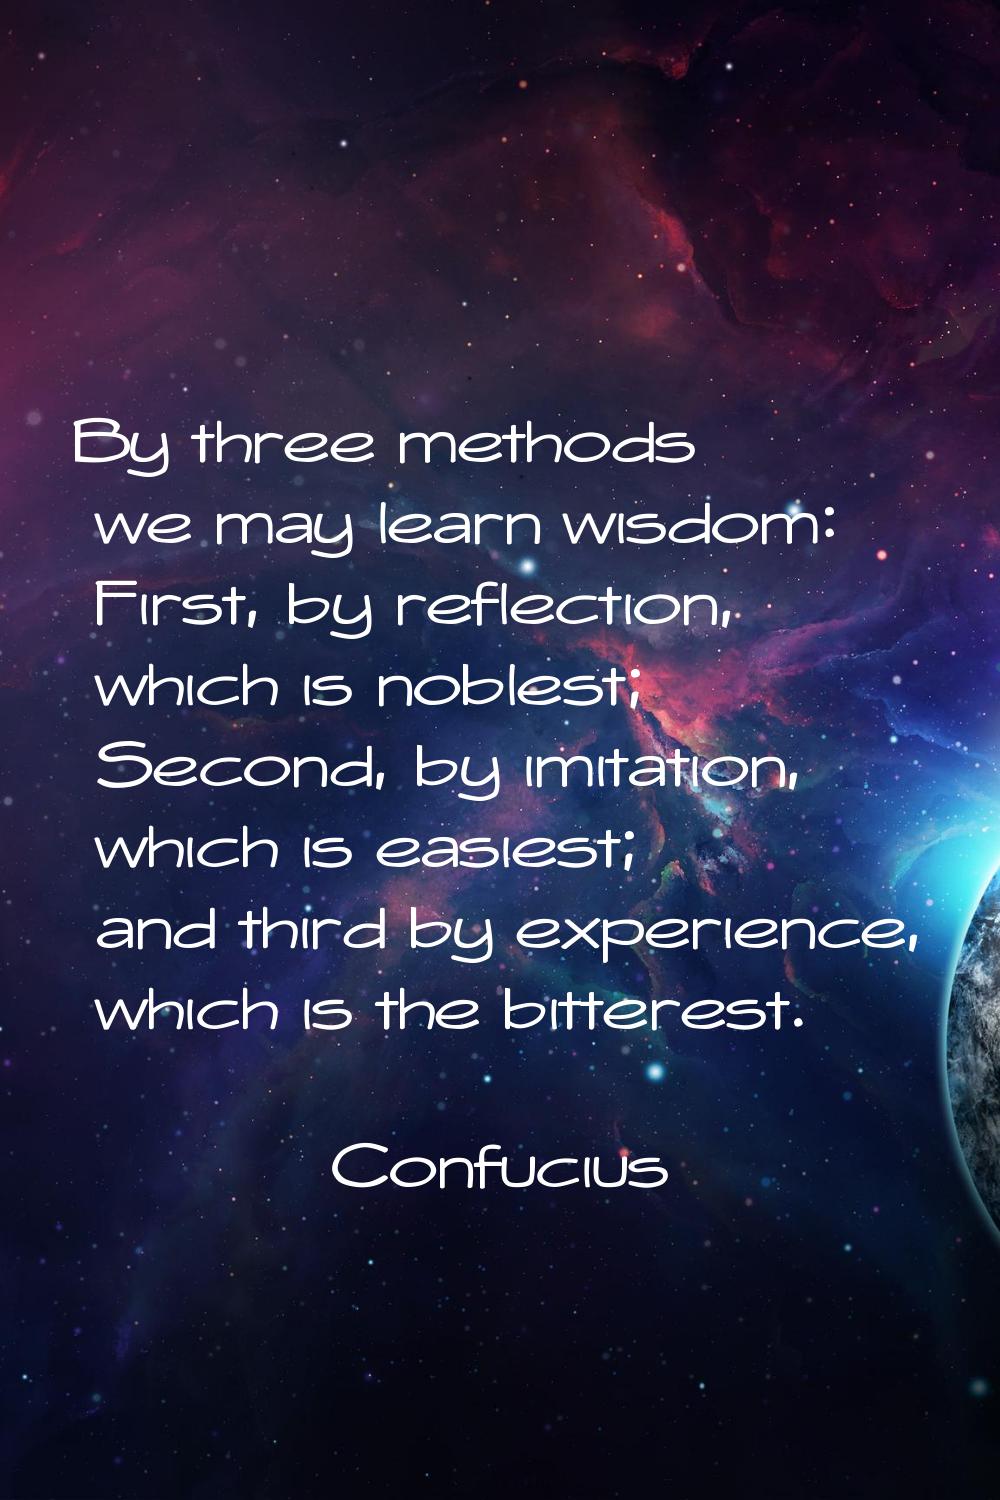 By three methods we may learn wisdom: First, by reflection, which is noblest; Second, by imitation,